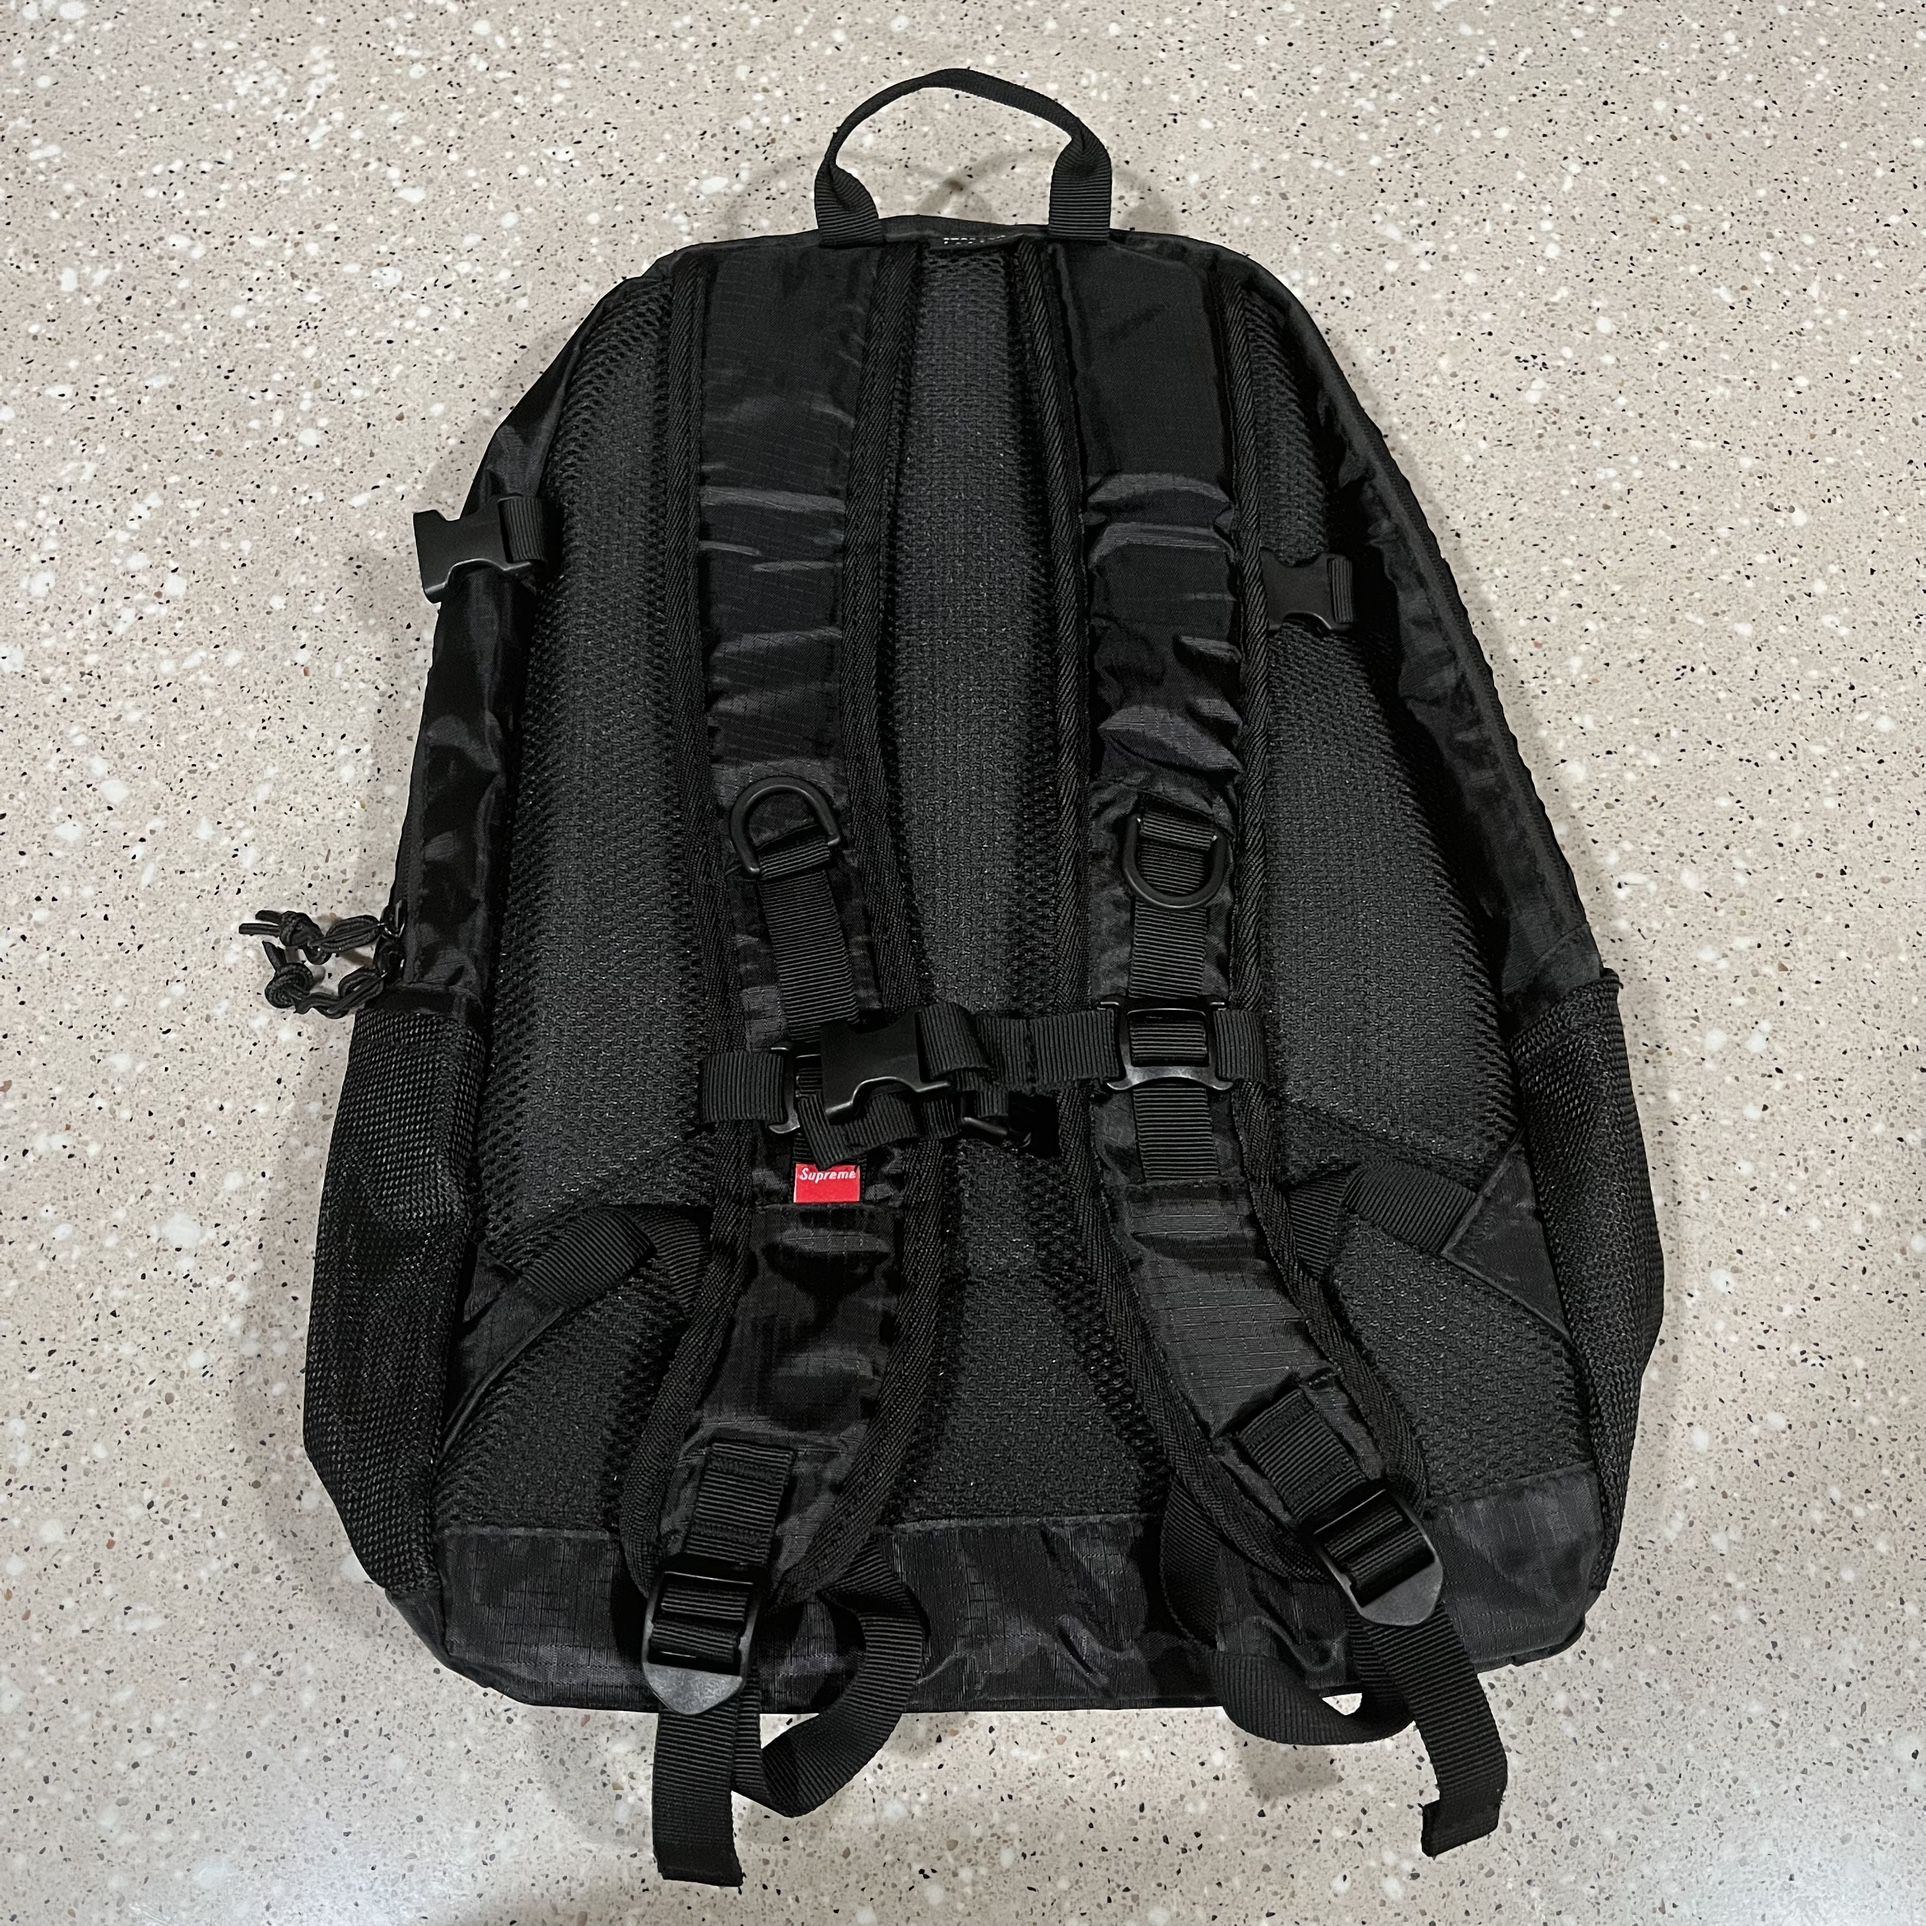 Supreme Backpack for Sale in Manteca, CA - OfferUp